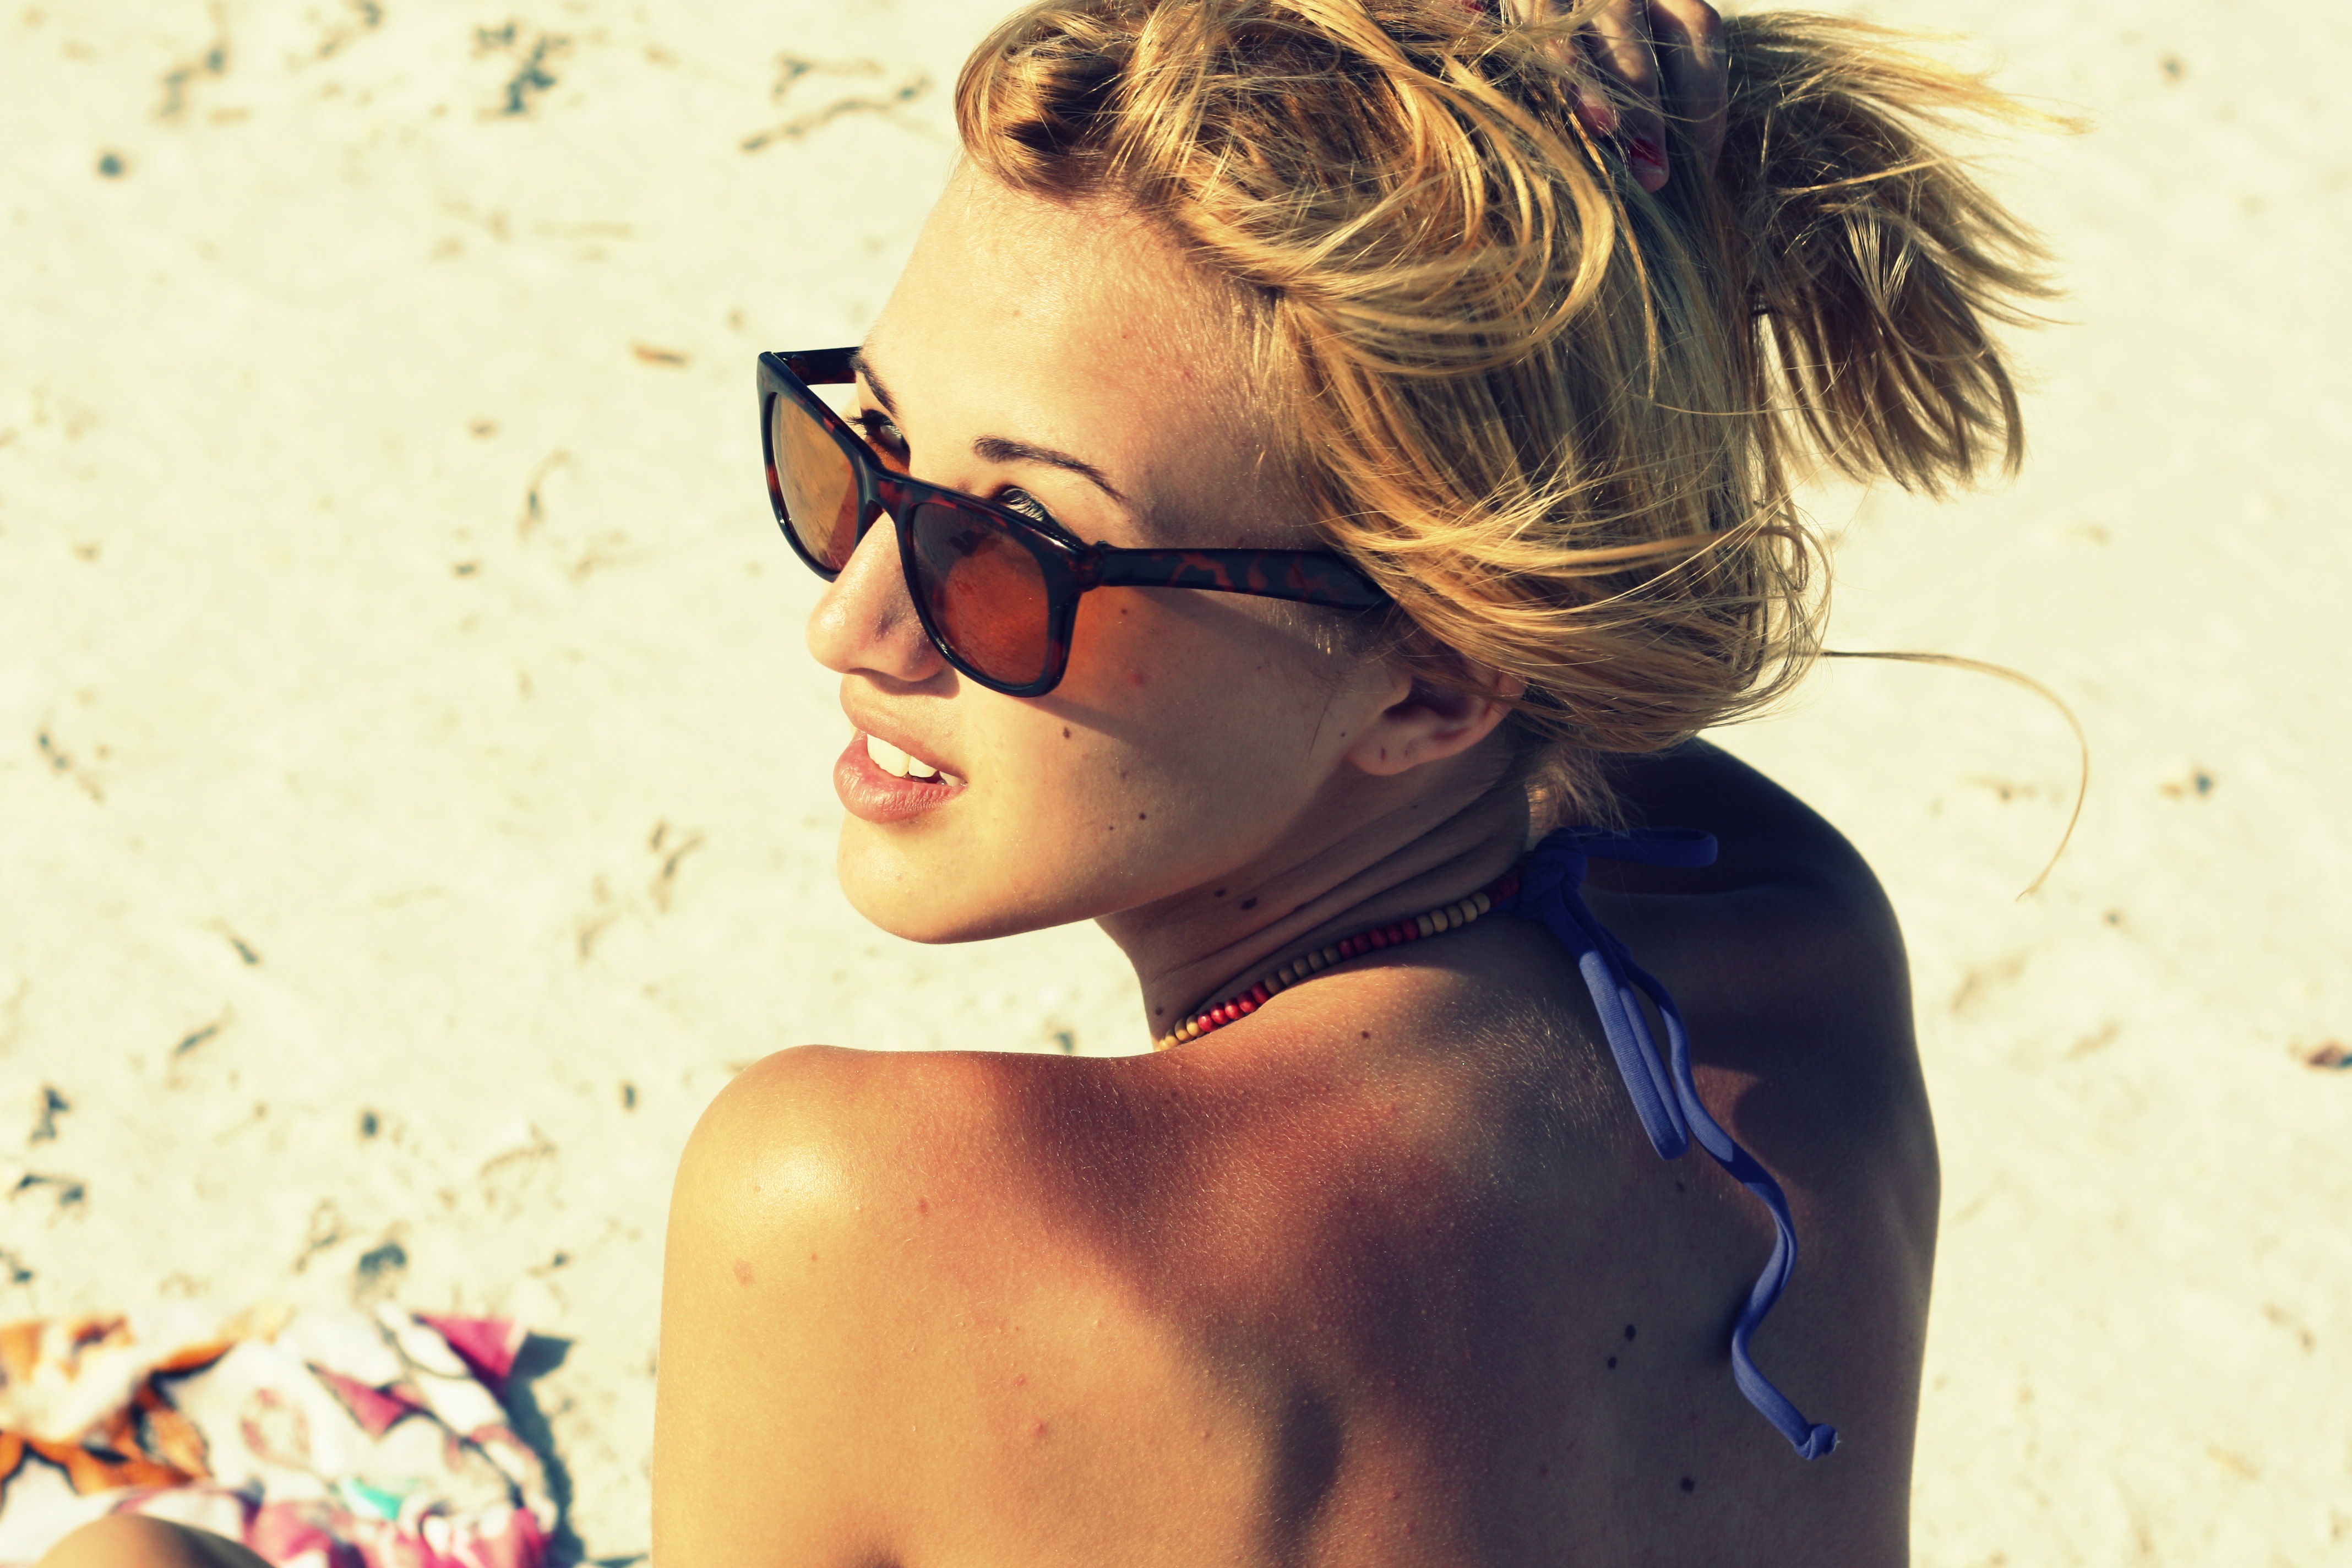 Getting Sunburned Is Much More Serious Than You Think, Here’s Why